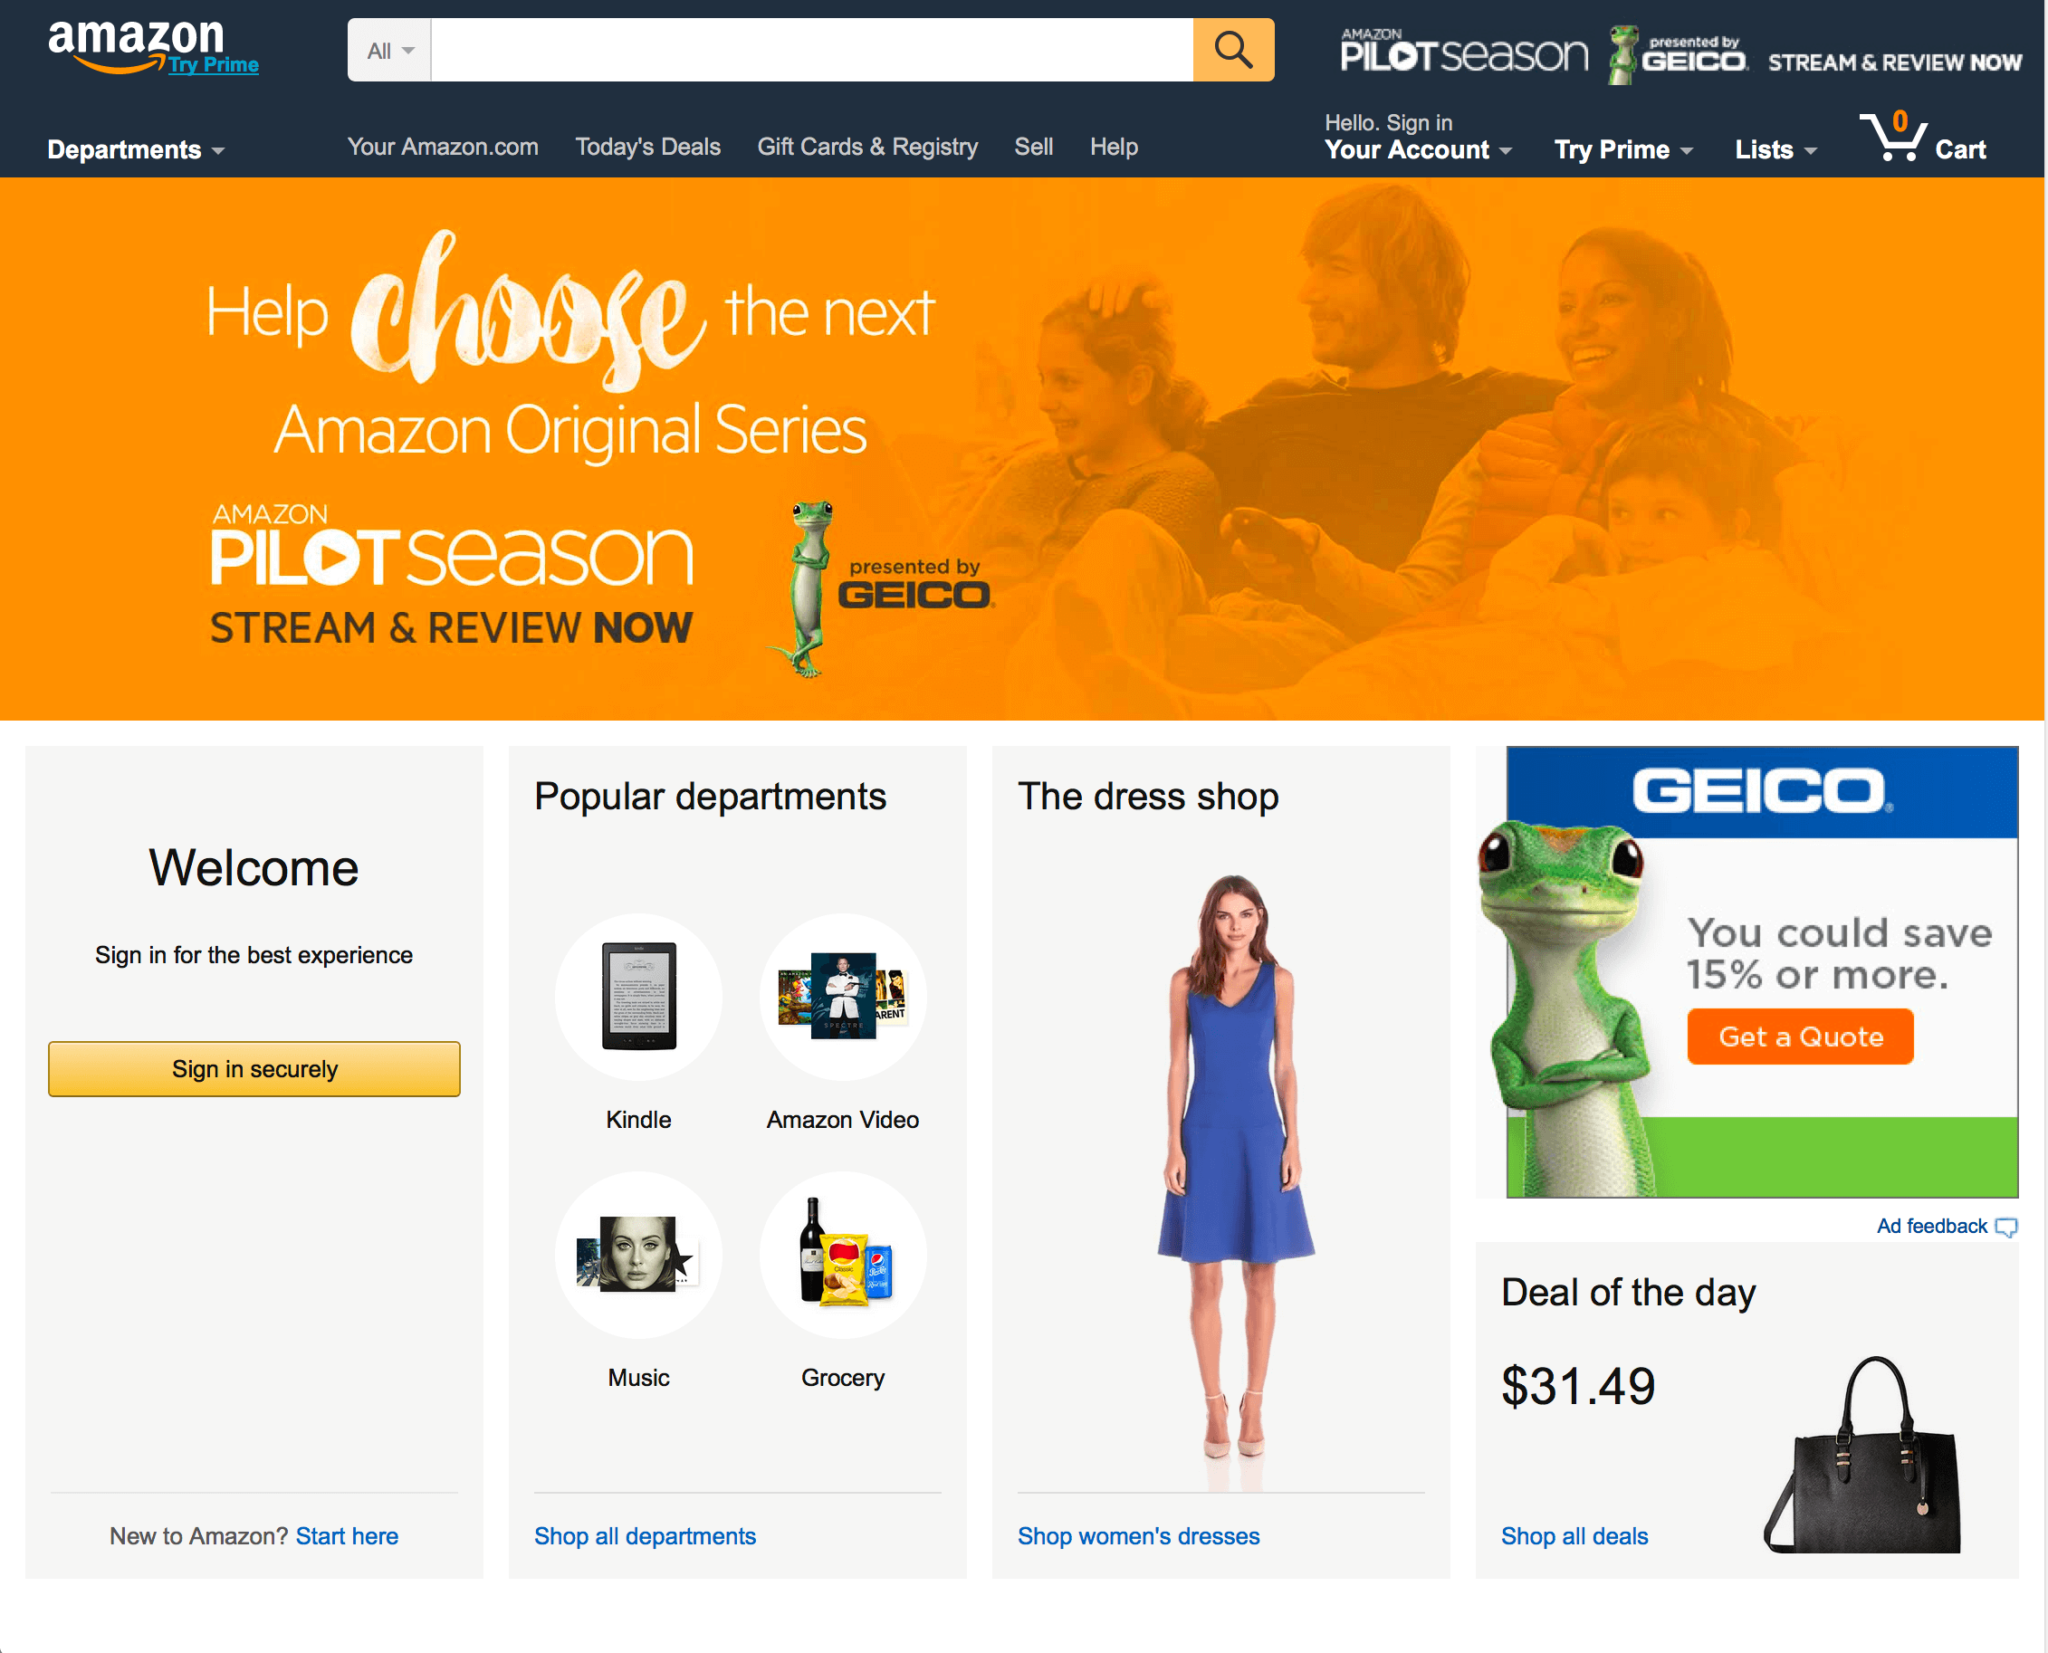 What E-Retailers can learn from Amazon